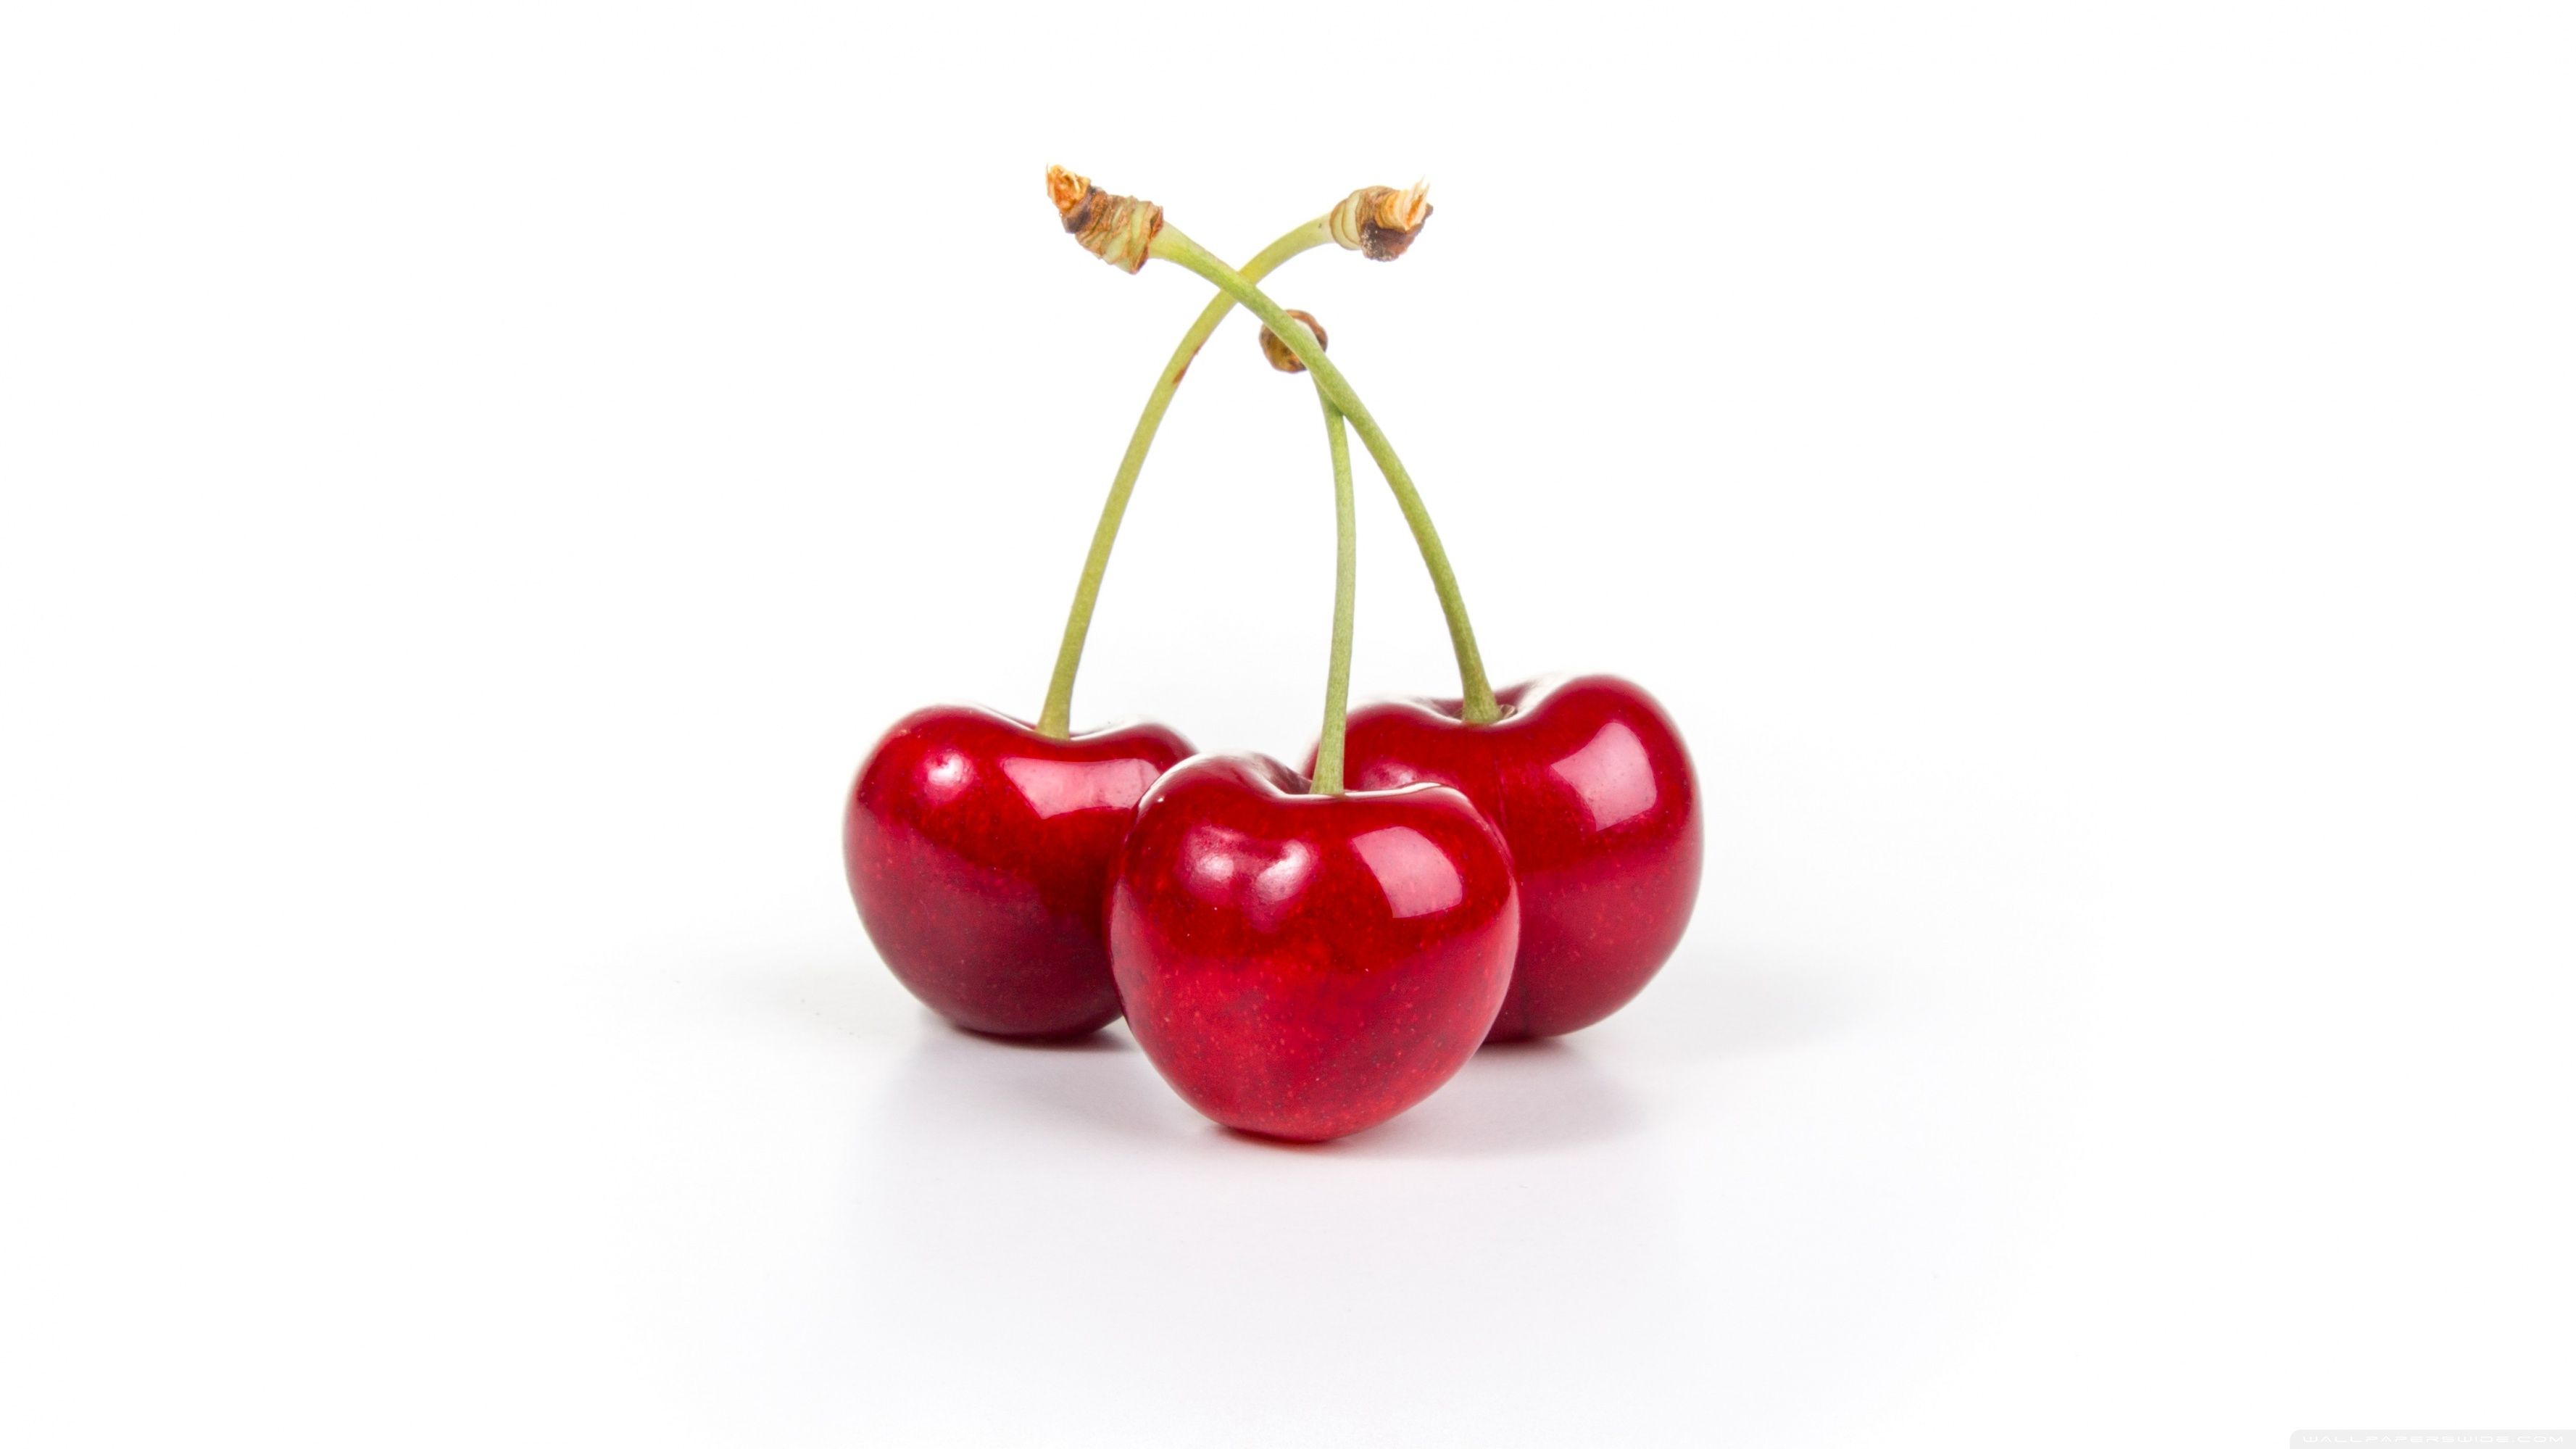 Three cherries with stems on a white background - Fruit